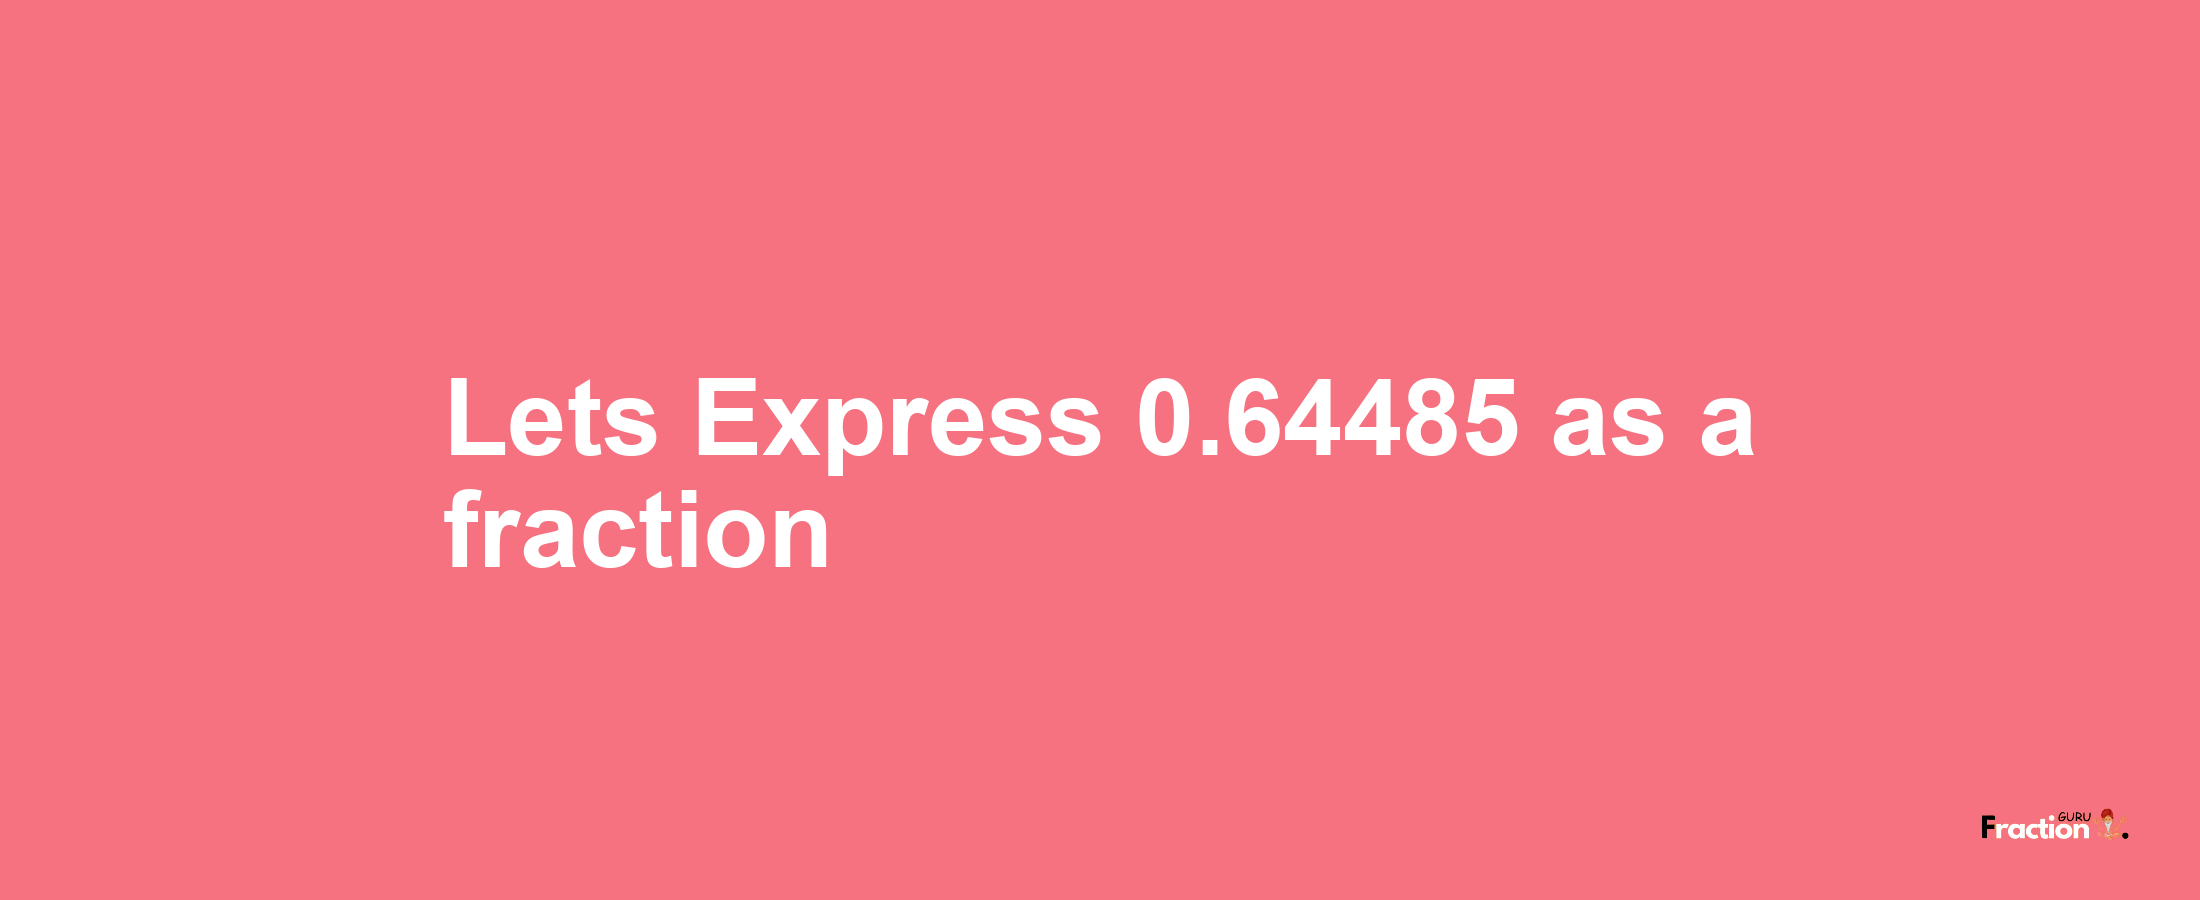 Lets Express 0.64485 as afraction